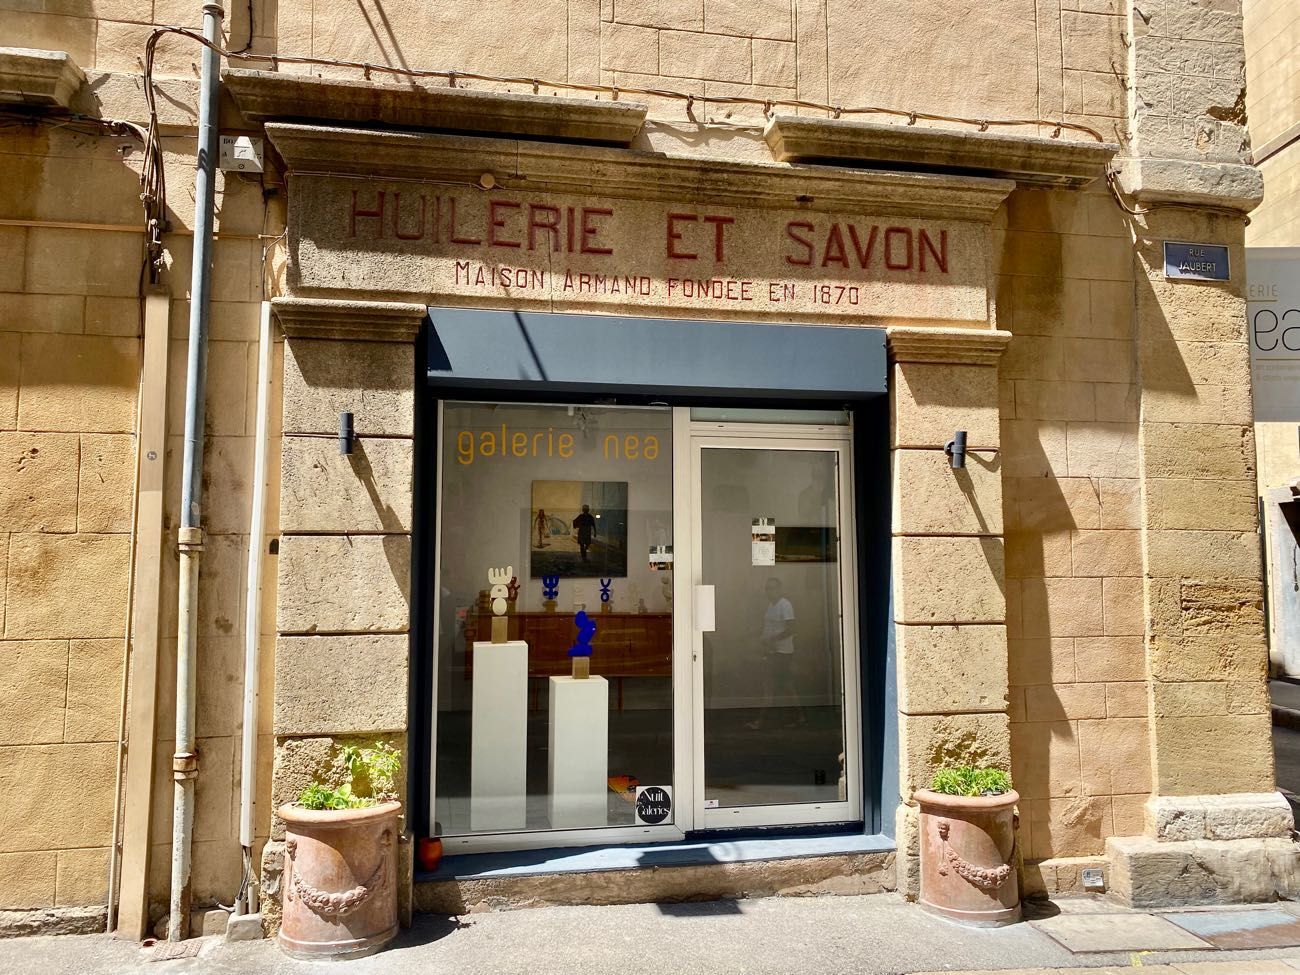 Galerie nea, your new contemporary art gallery in Aix-en-provence launches its e-commerce site